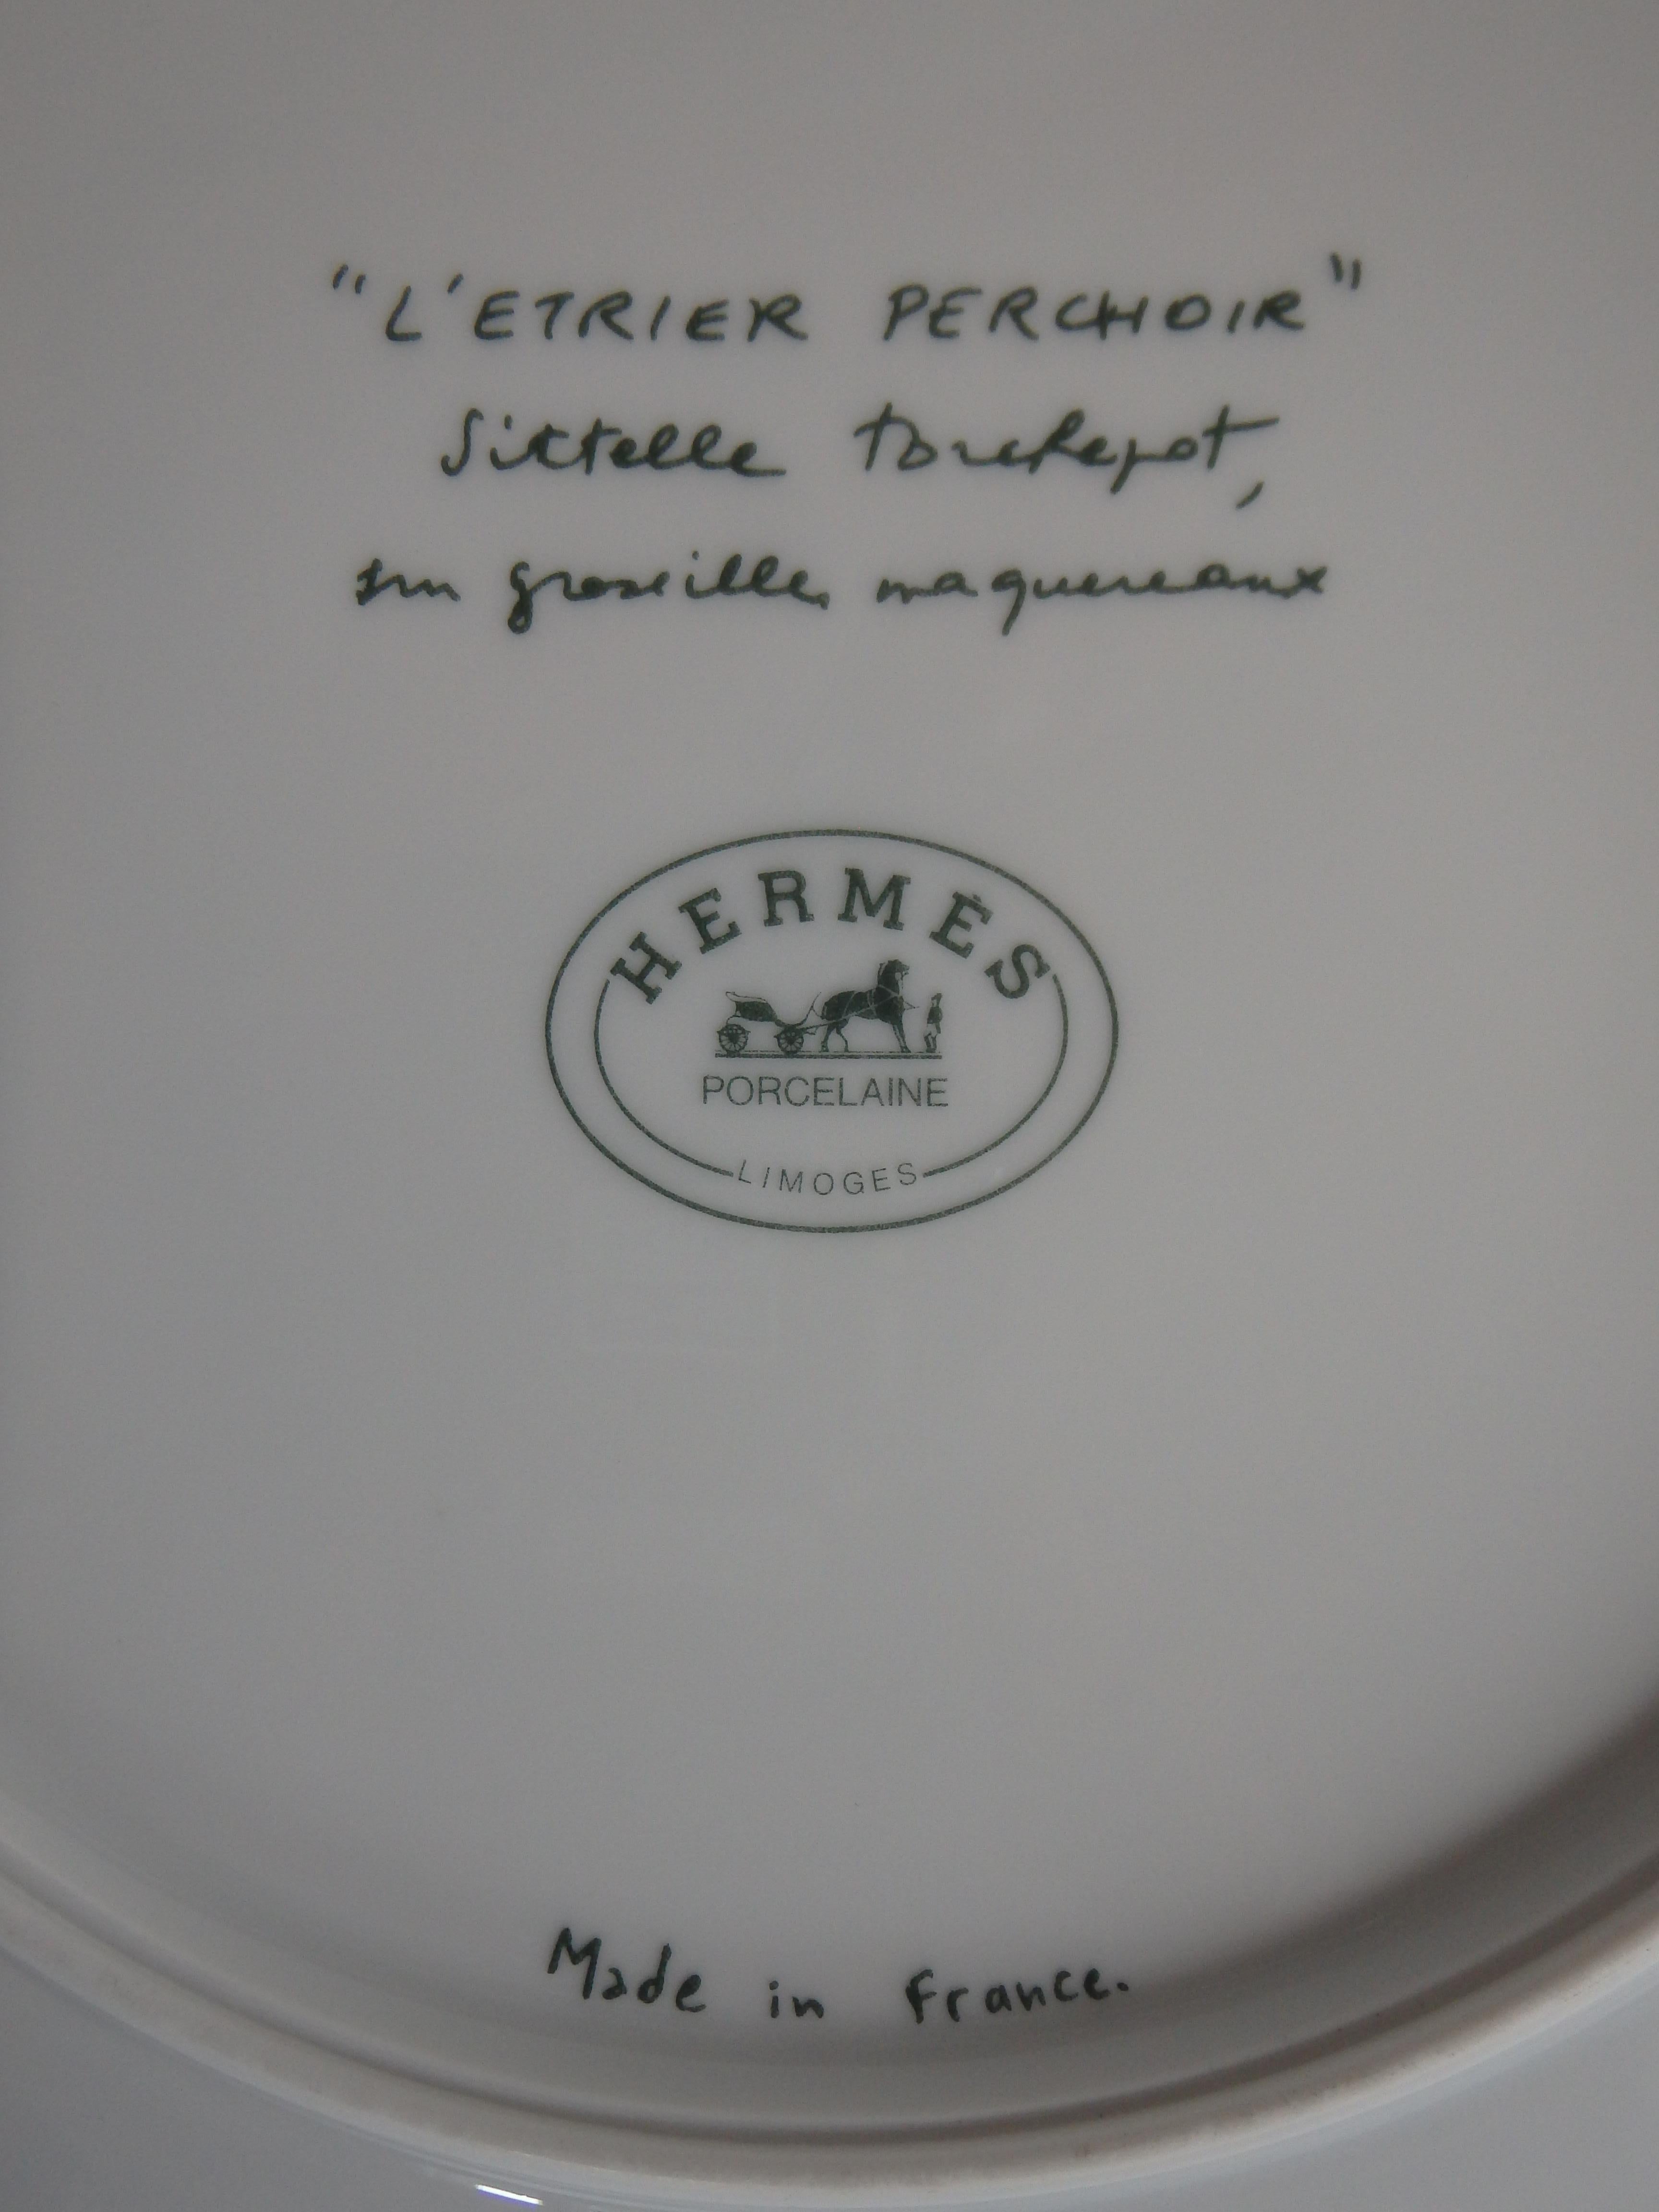 6 HERMES , Paris by Limoges dinner plates of the series 